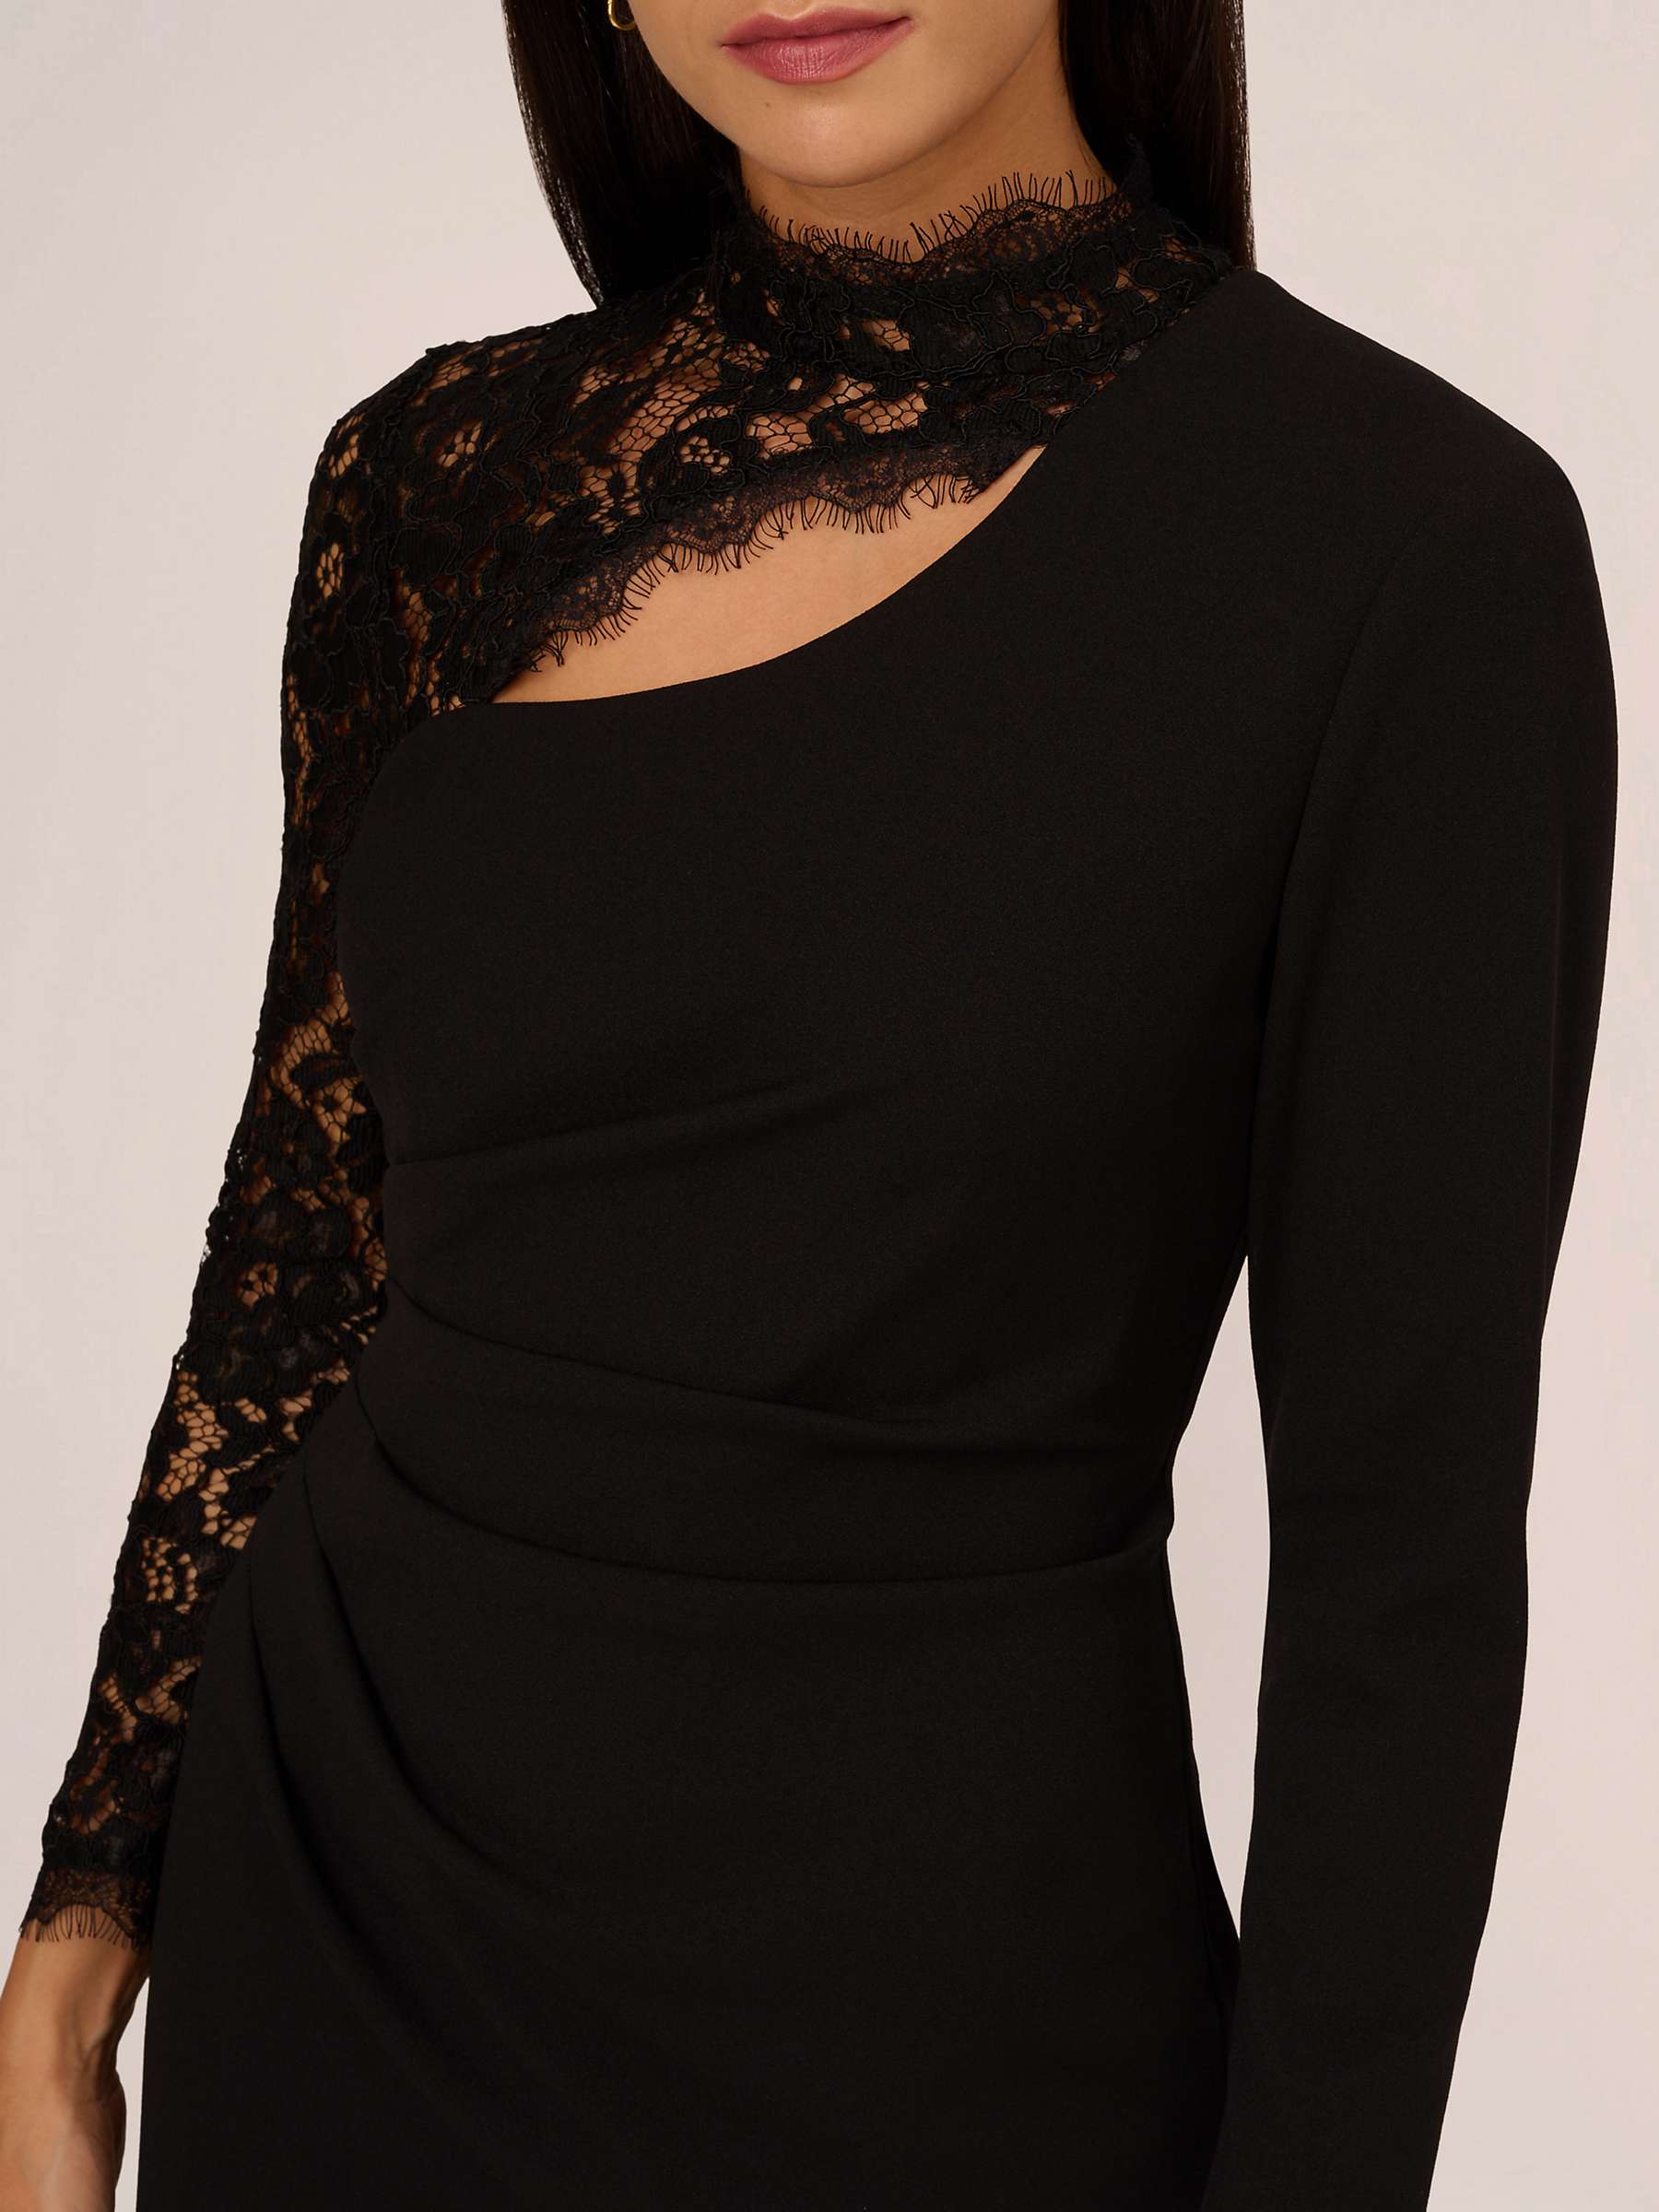 Buy Aidan by Adrianna Papell Lace and Stretch Crepe Mini Dress, Black Online at johnlewis.com